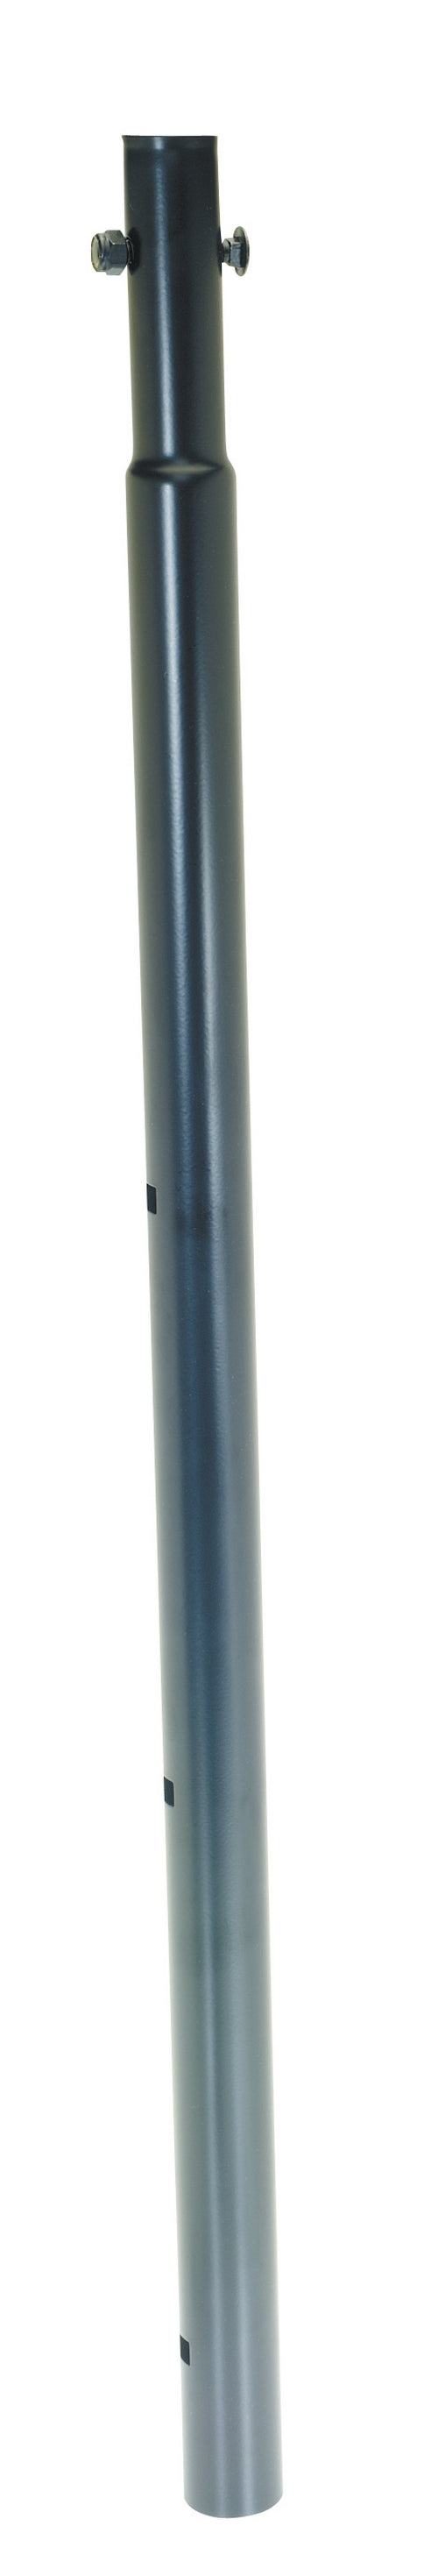 VMP EXT-A Extension Pipe for VMP014/024, LCD-2537C and PM Series